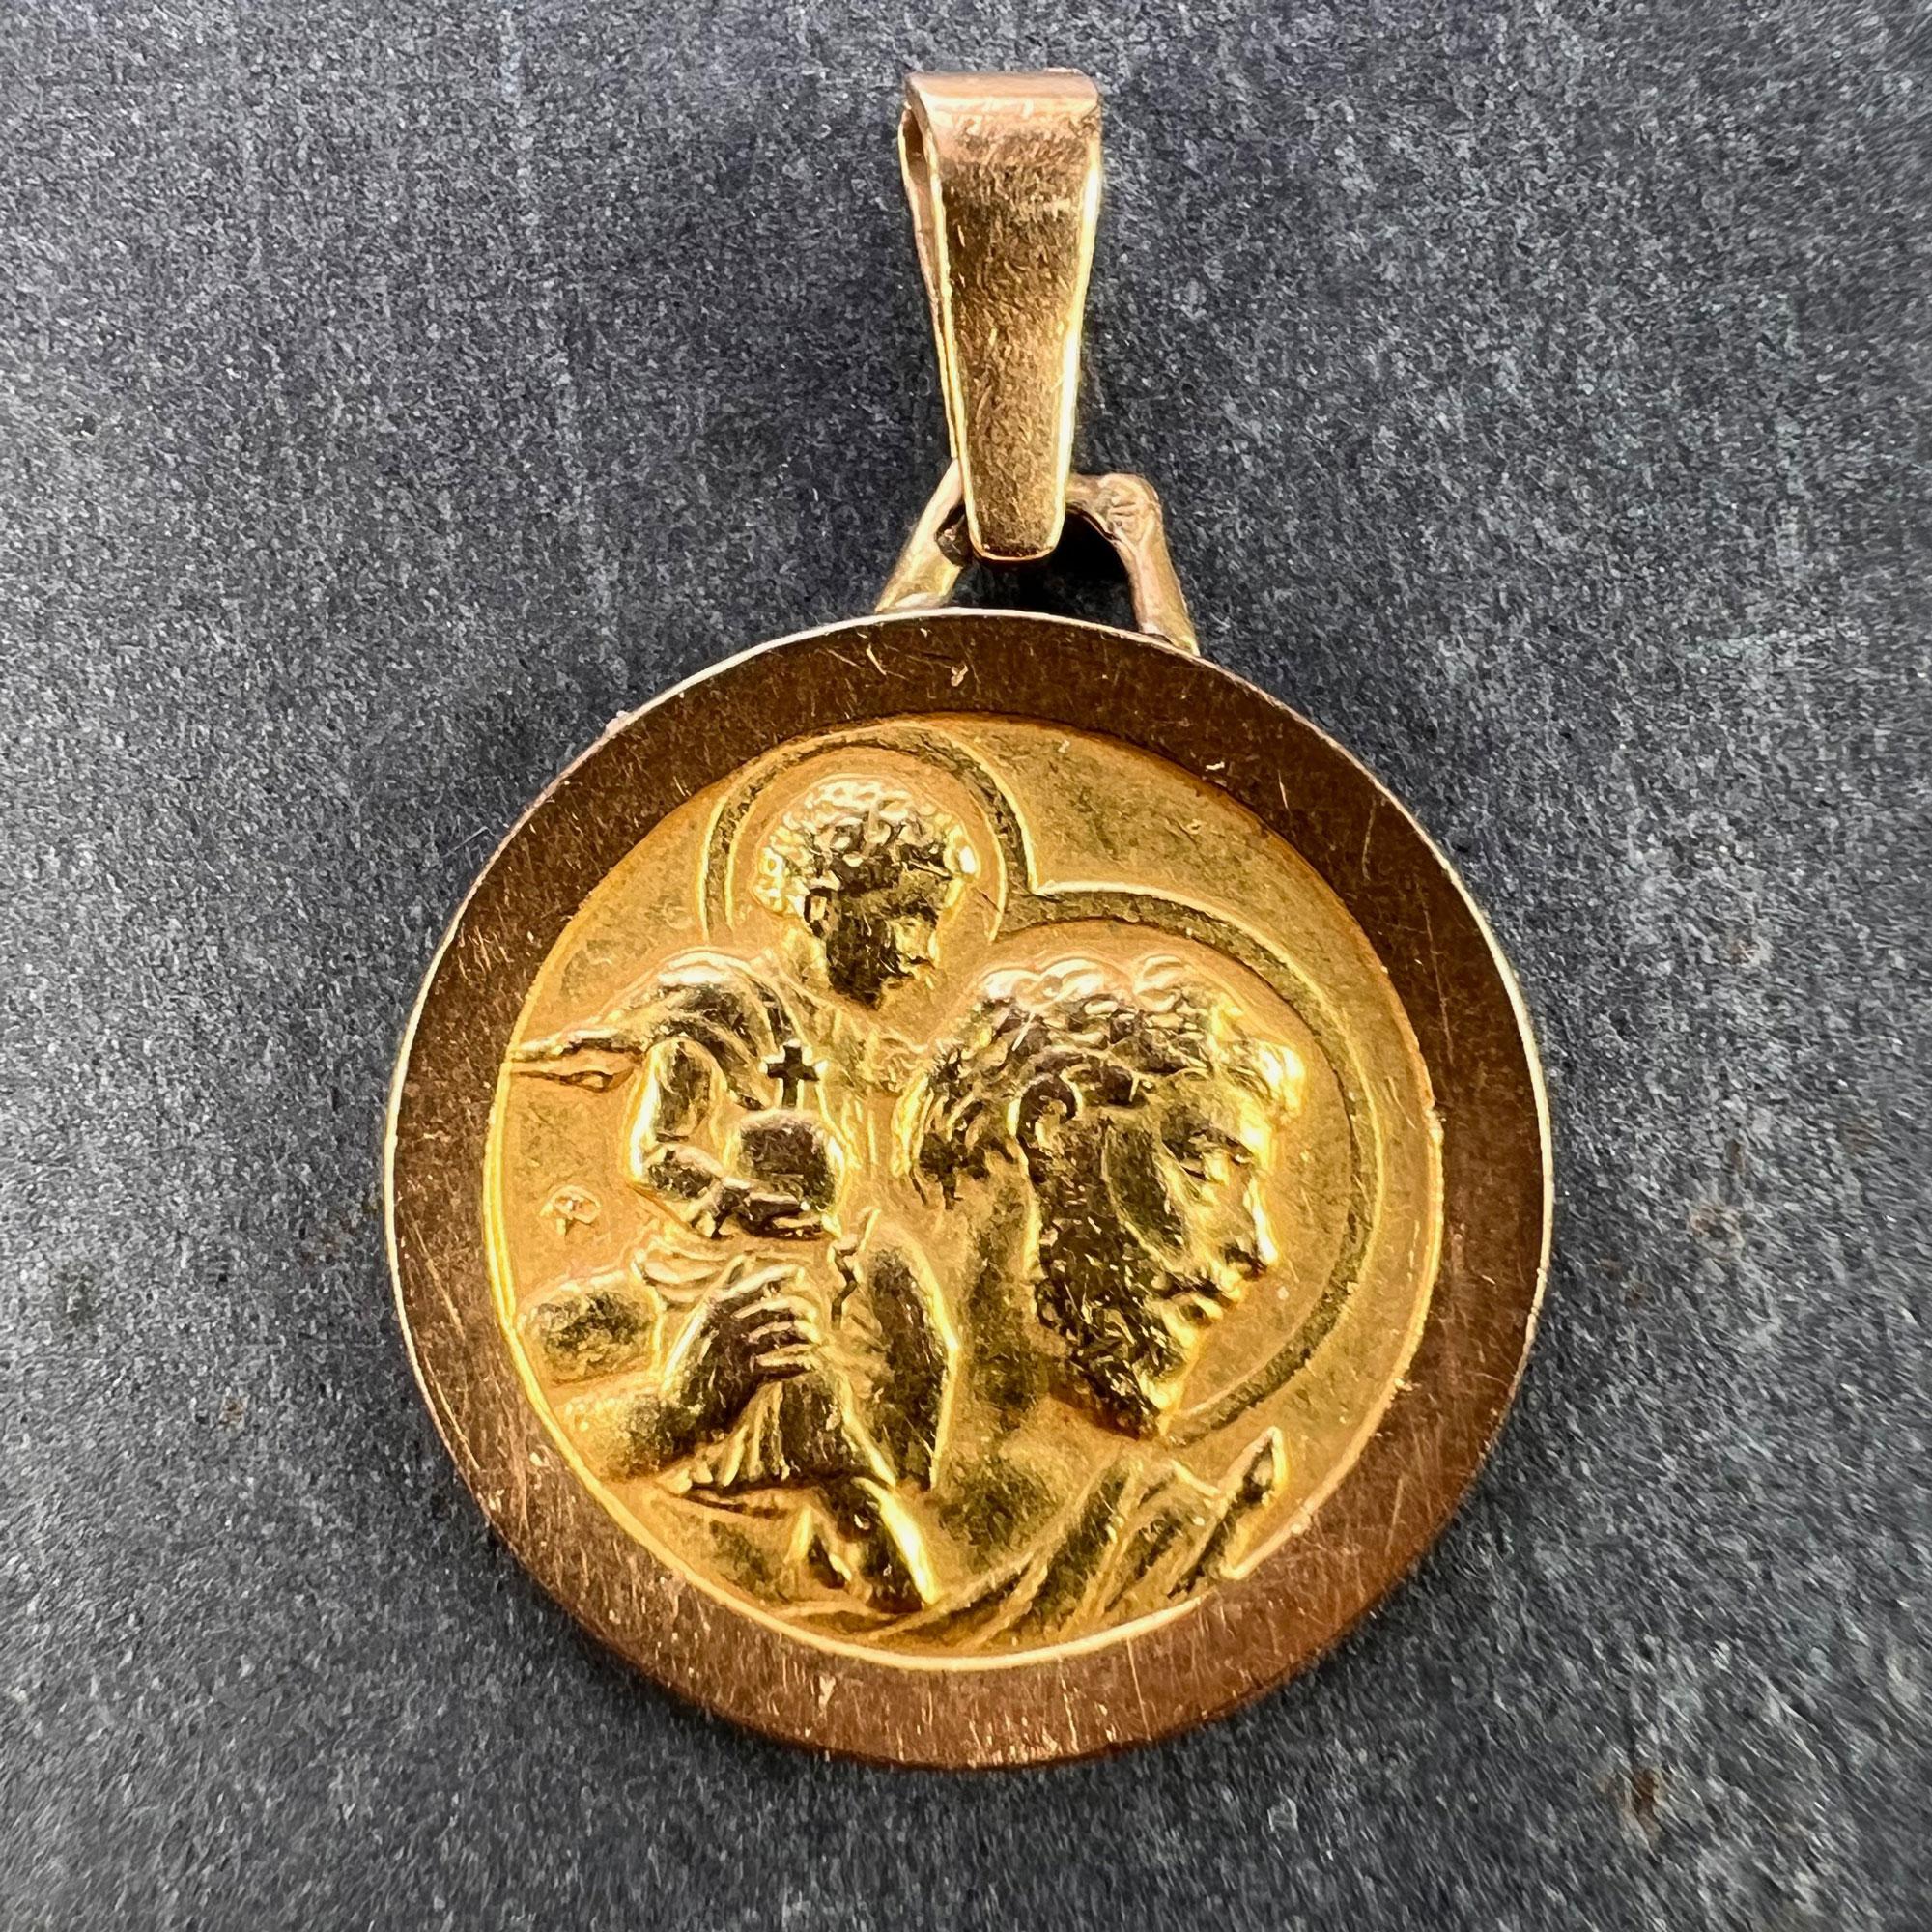 A French 18 karat (18K) yellow and rose gold charm pendant depicting the head of St Christopher as he carries the infant Christ across a river. Stamped with the eagle’s head for French manufacture and 18 carat gold, and an unknown maker’s mark. The